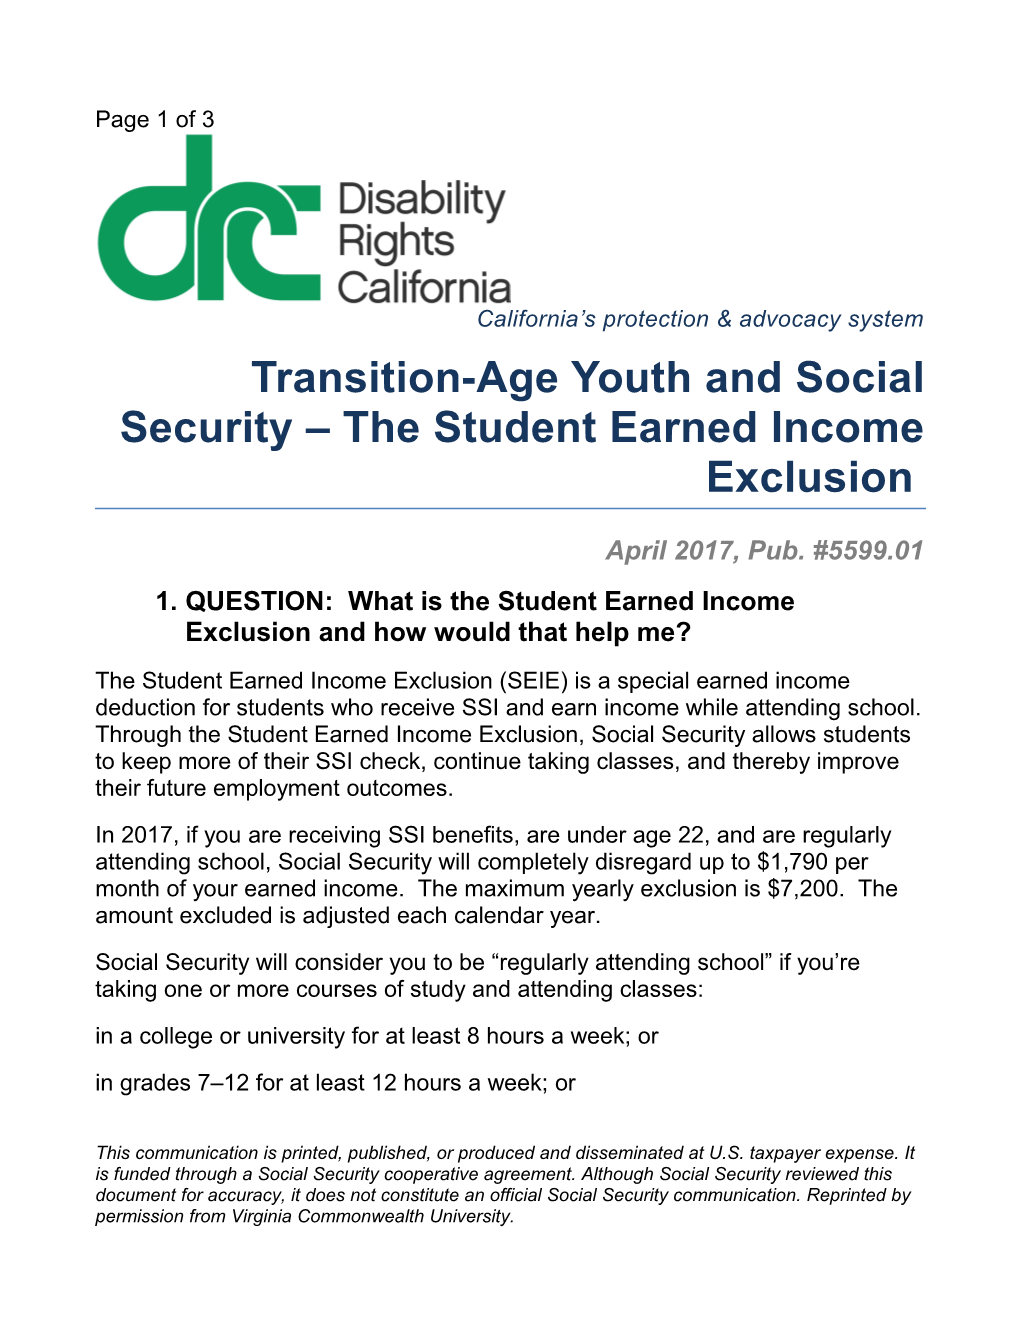 Transition-Age Youth and Social Security the Student Earned Income Exclusion